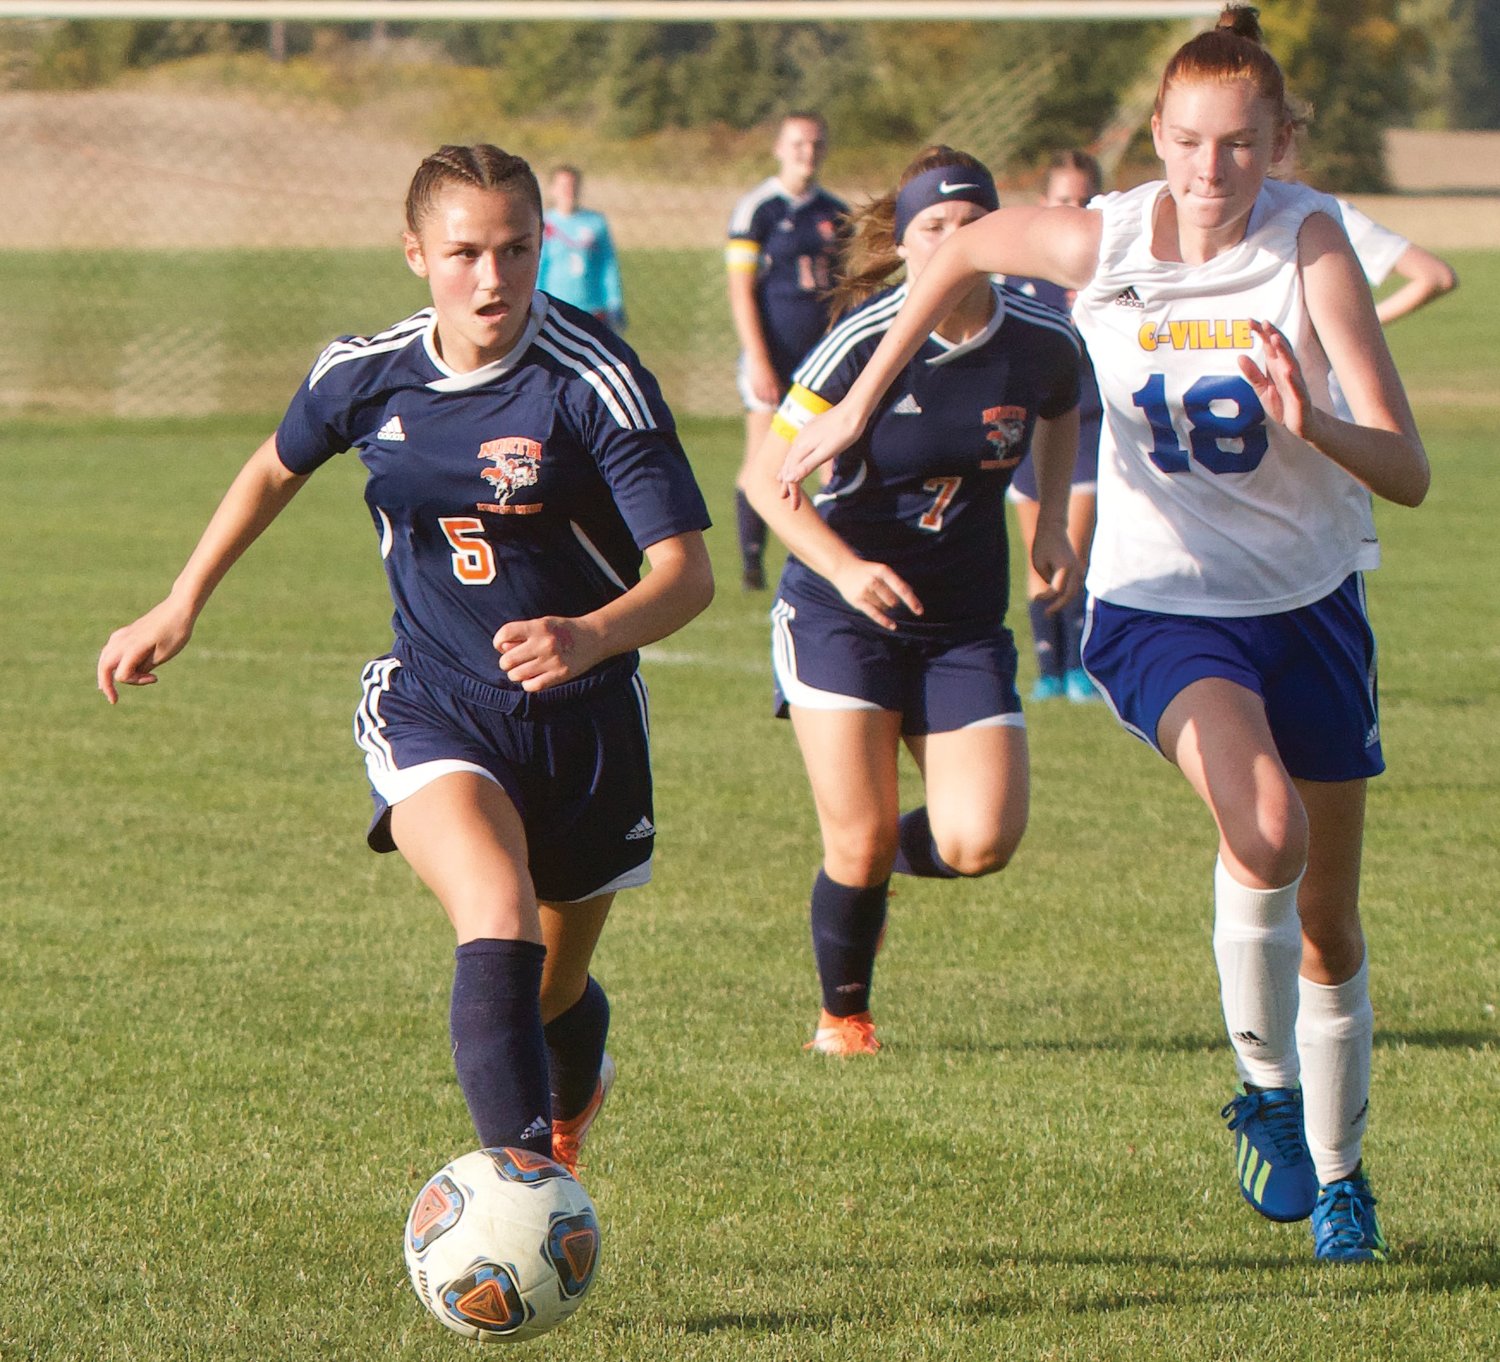 Teegan Bacon will lead the North Montgomery girls soccer team again this season. Bacon needs just a single goal to move into first place all-time in Charger history for career goals.